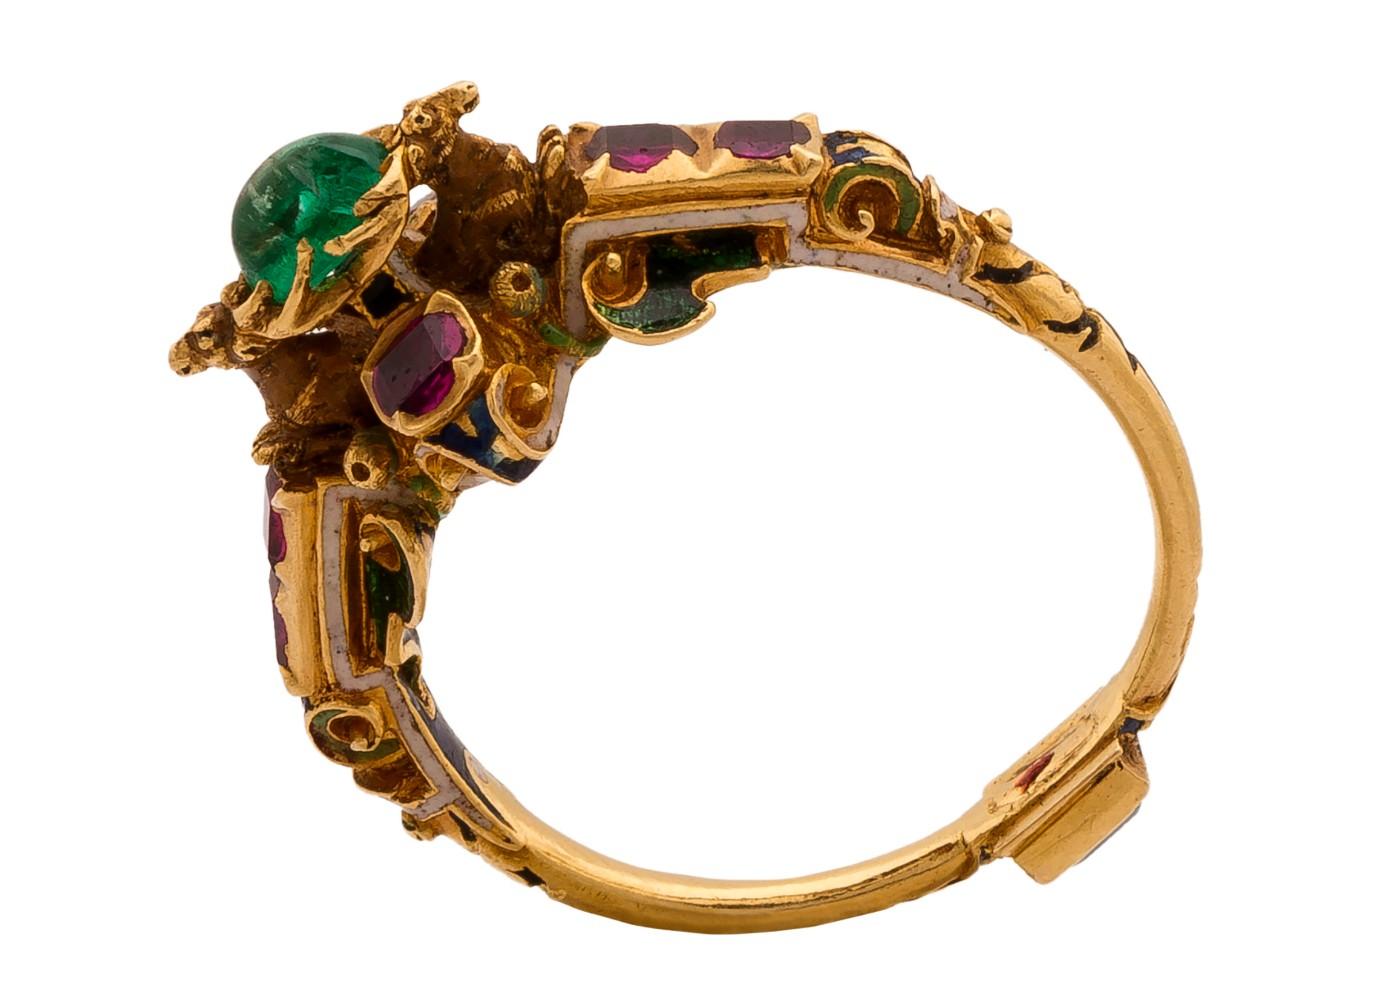 A Monumental Renaissance Gemstone Rong with Two Stags and Exceptional Provenance